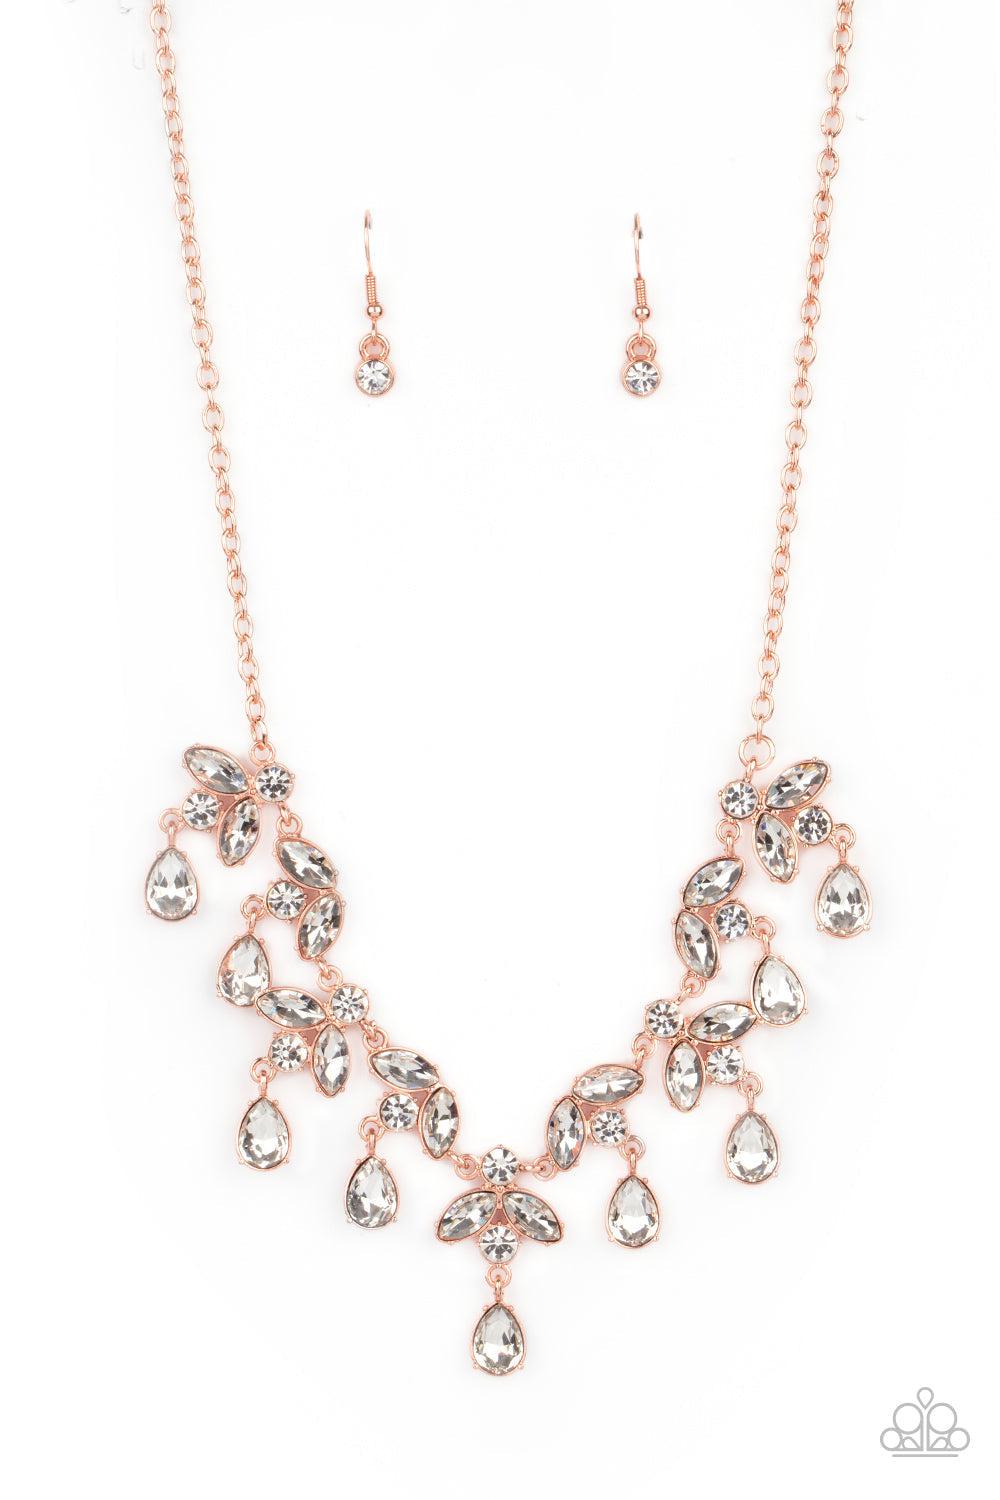 Vintage Royale Copper and Rhinestone Necklace - Paparazzi Accessories- lightbox - CarasShop.com - $5 Jewelry by Cara Jewels